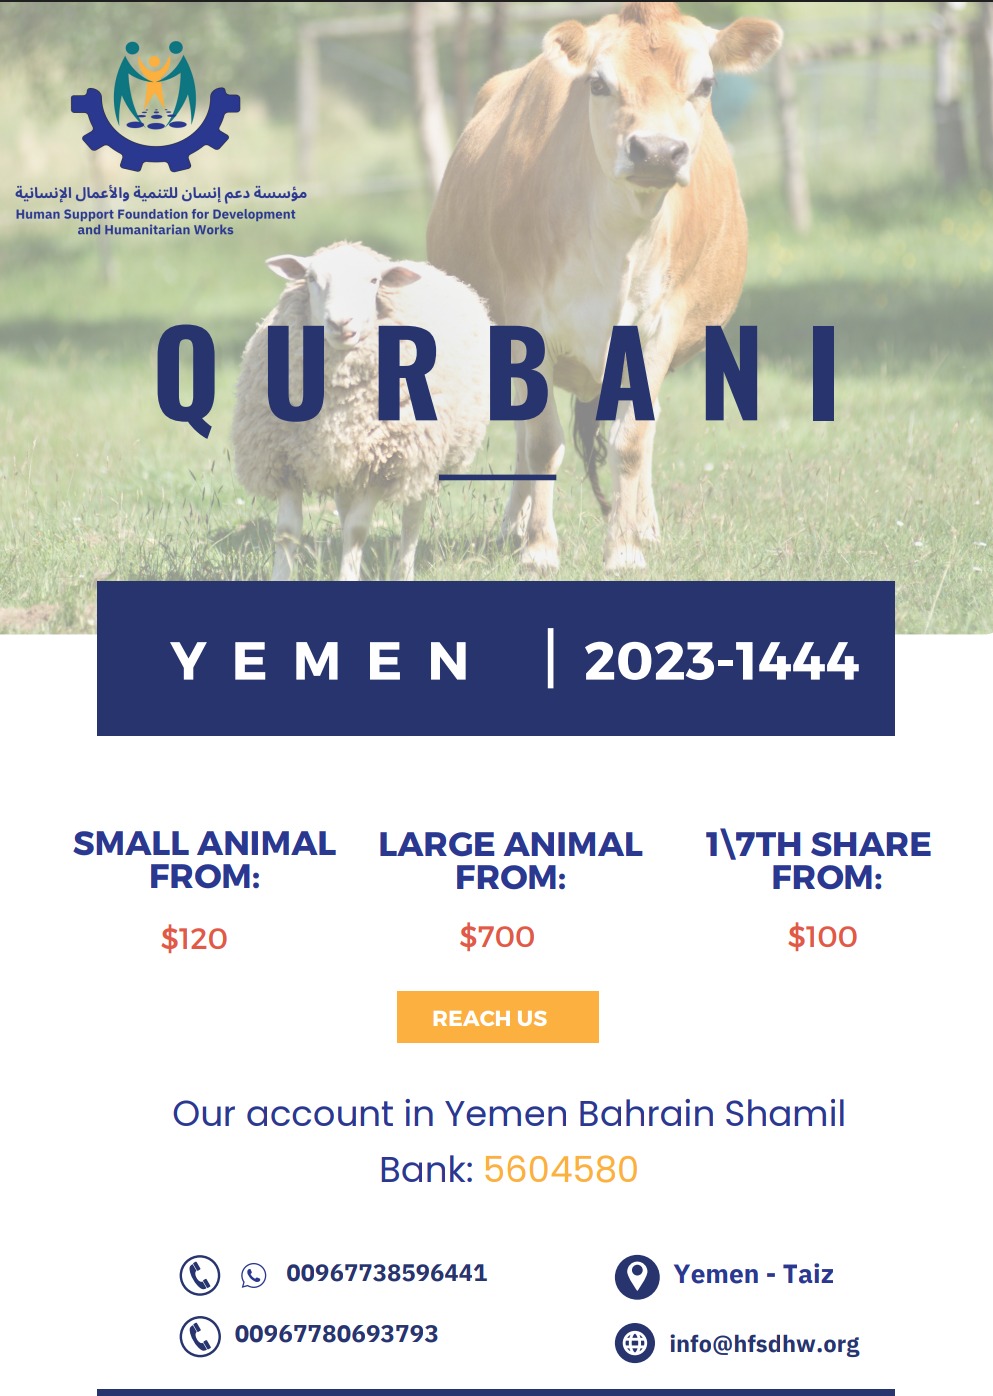 Your Qurbani is Happiness for them